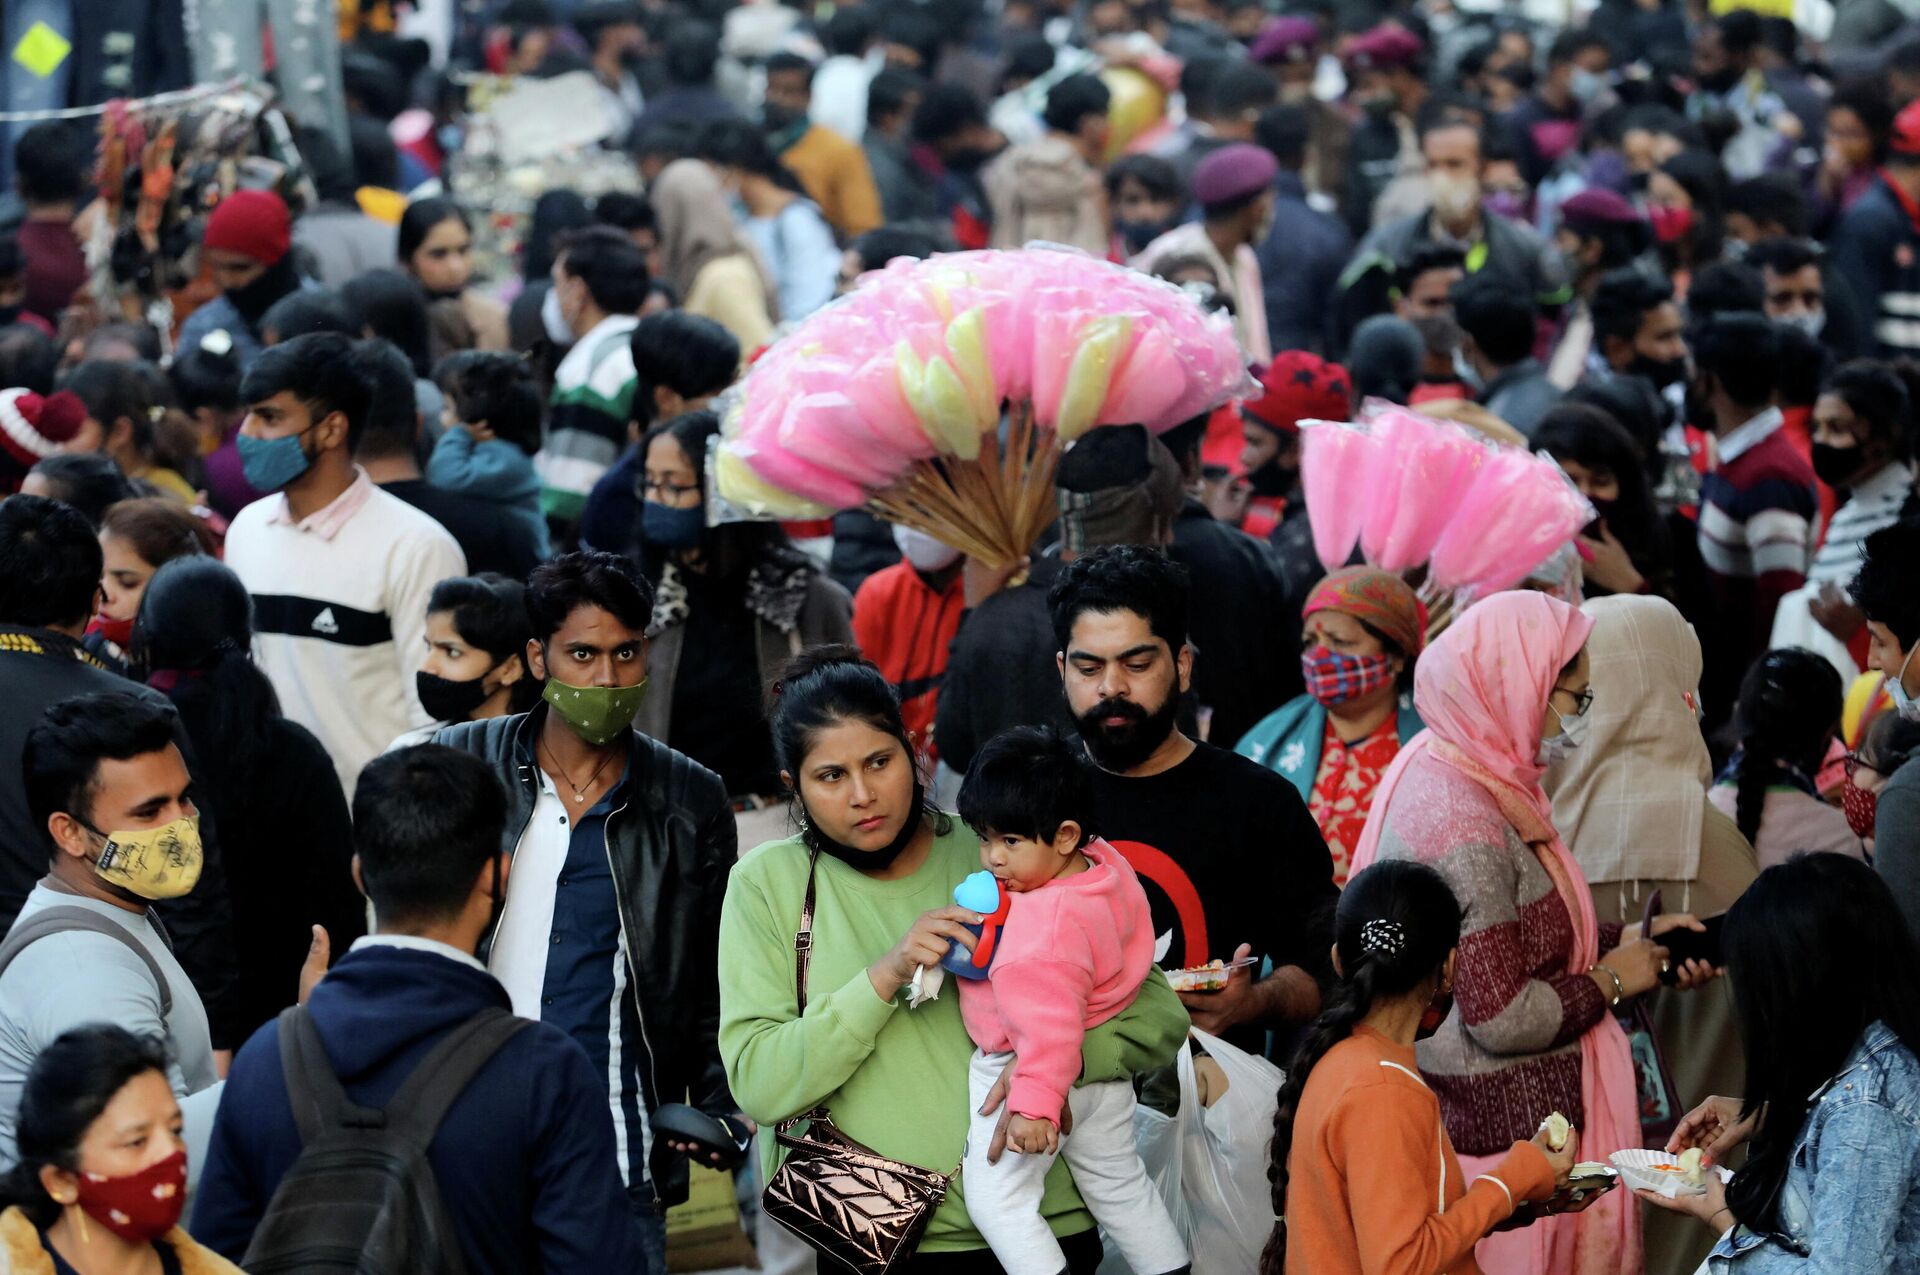 People shop at a crowded market ahead of Christmas, during the ongoing coronavirus disease (COVID-19) pandemic, in New Delhi, December 23, 2021 - Sputnik International, 1920, 24.12.2021